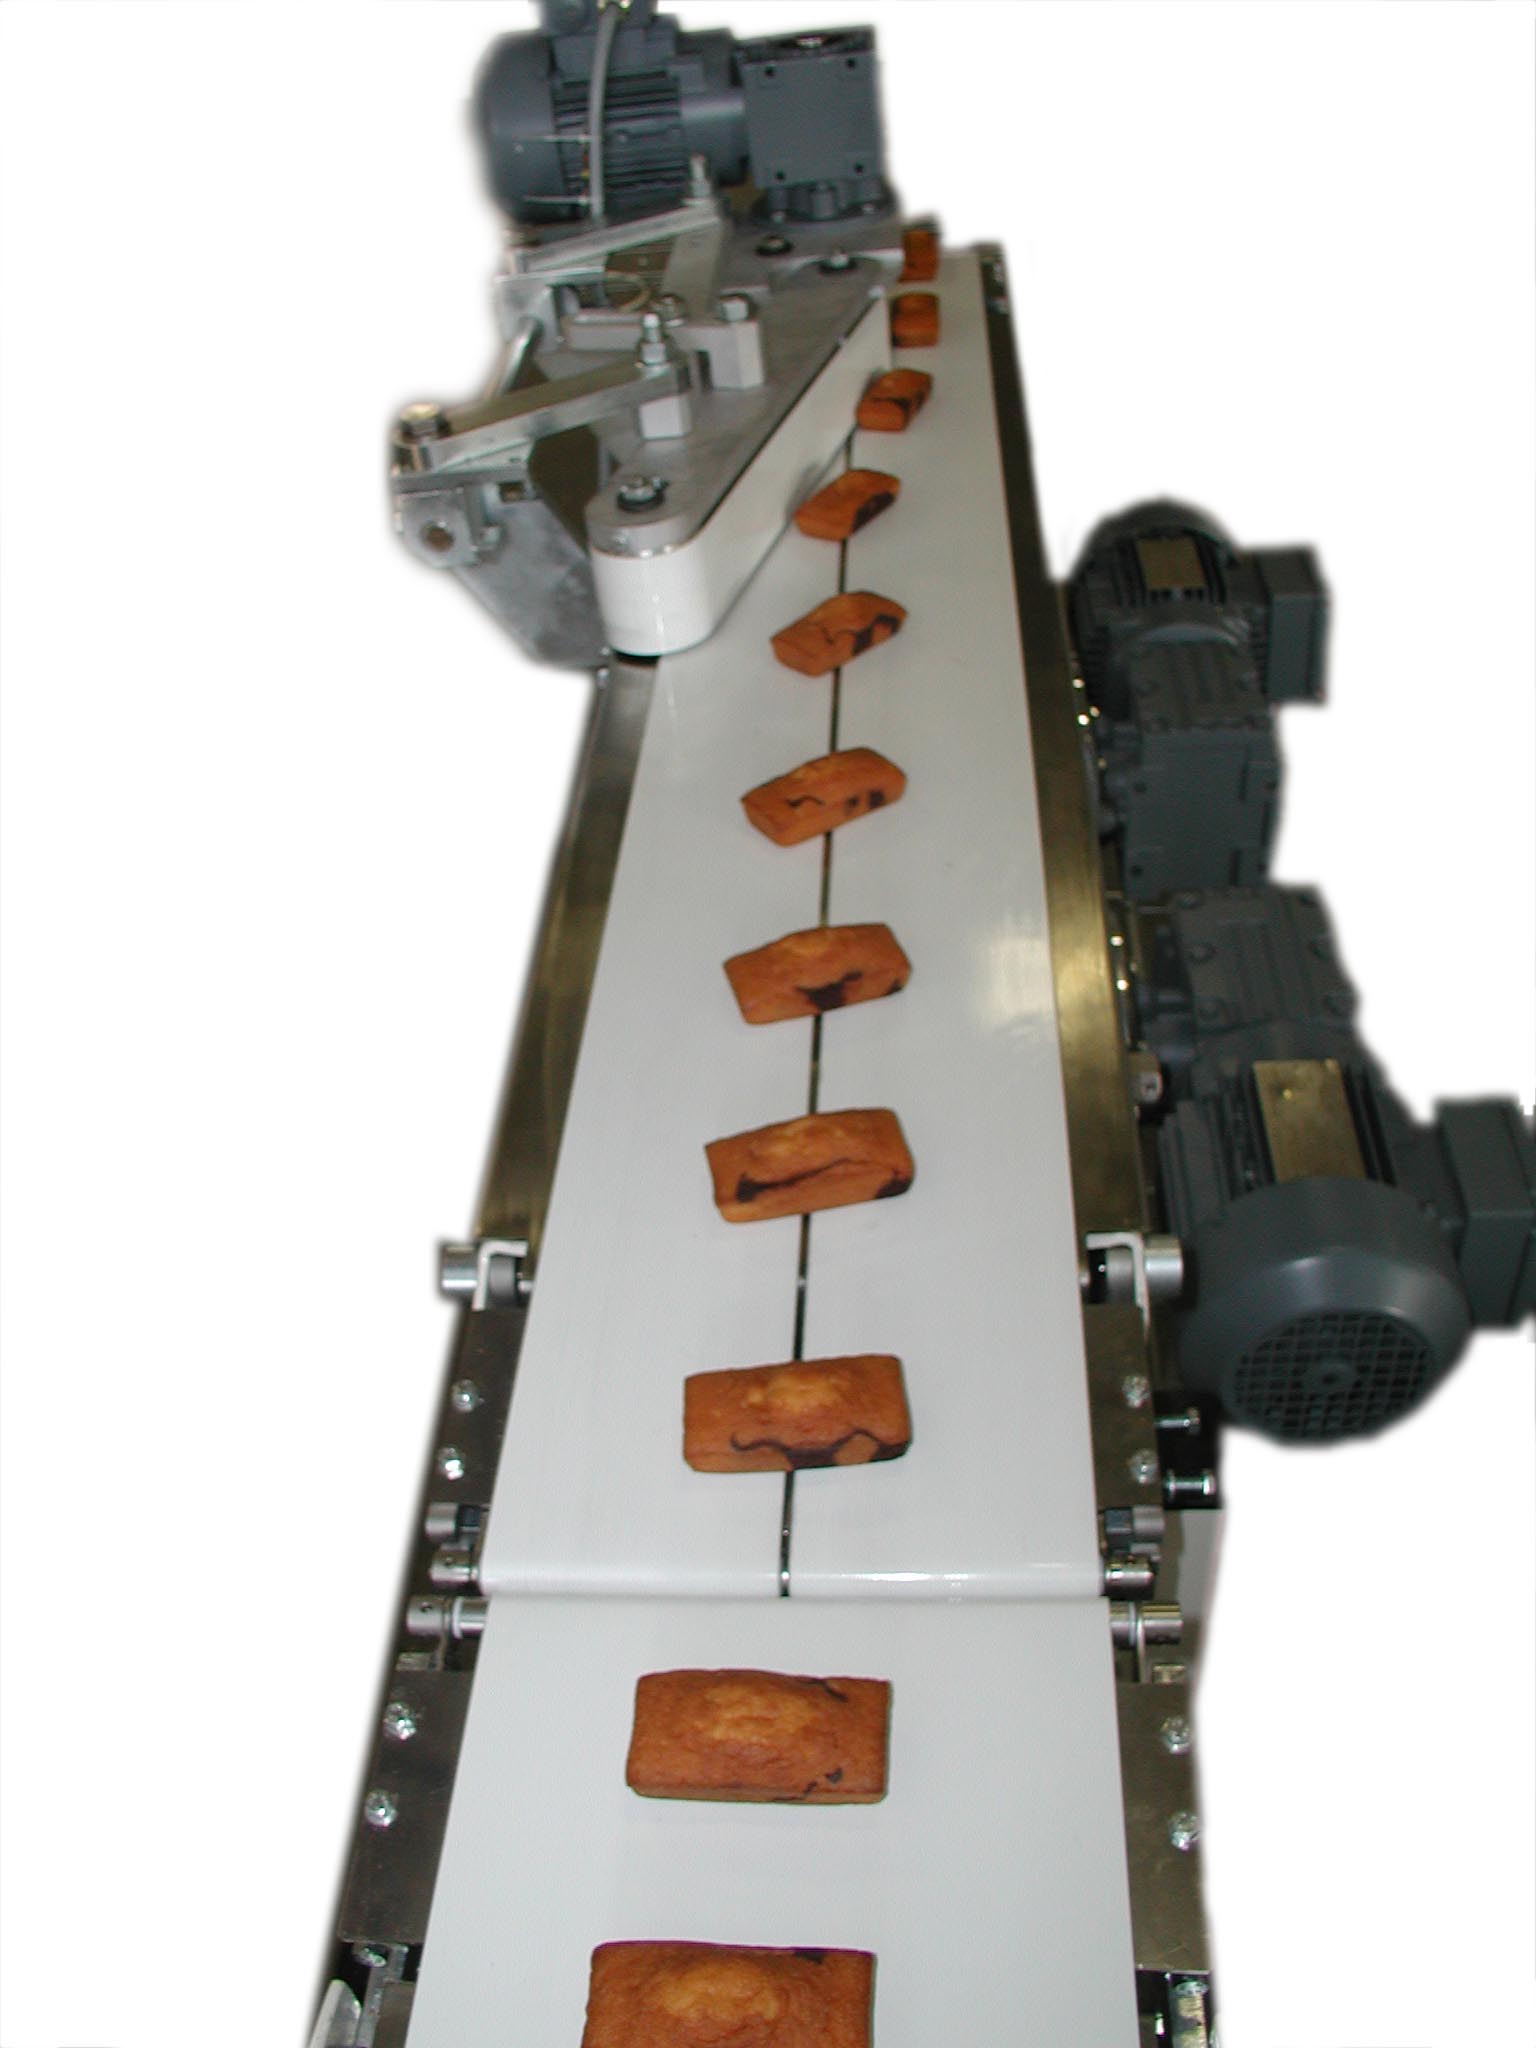 Lines for packaging of biscuits or individual pastries